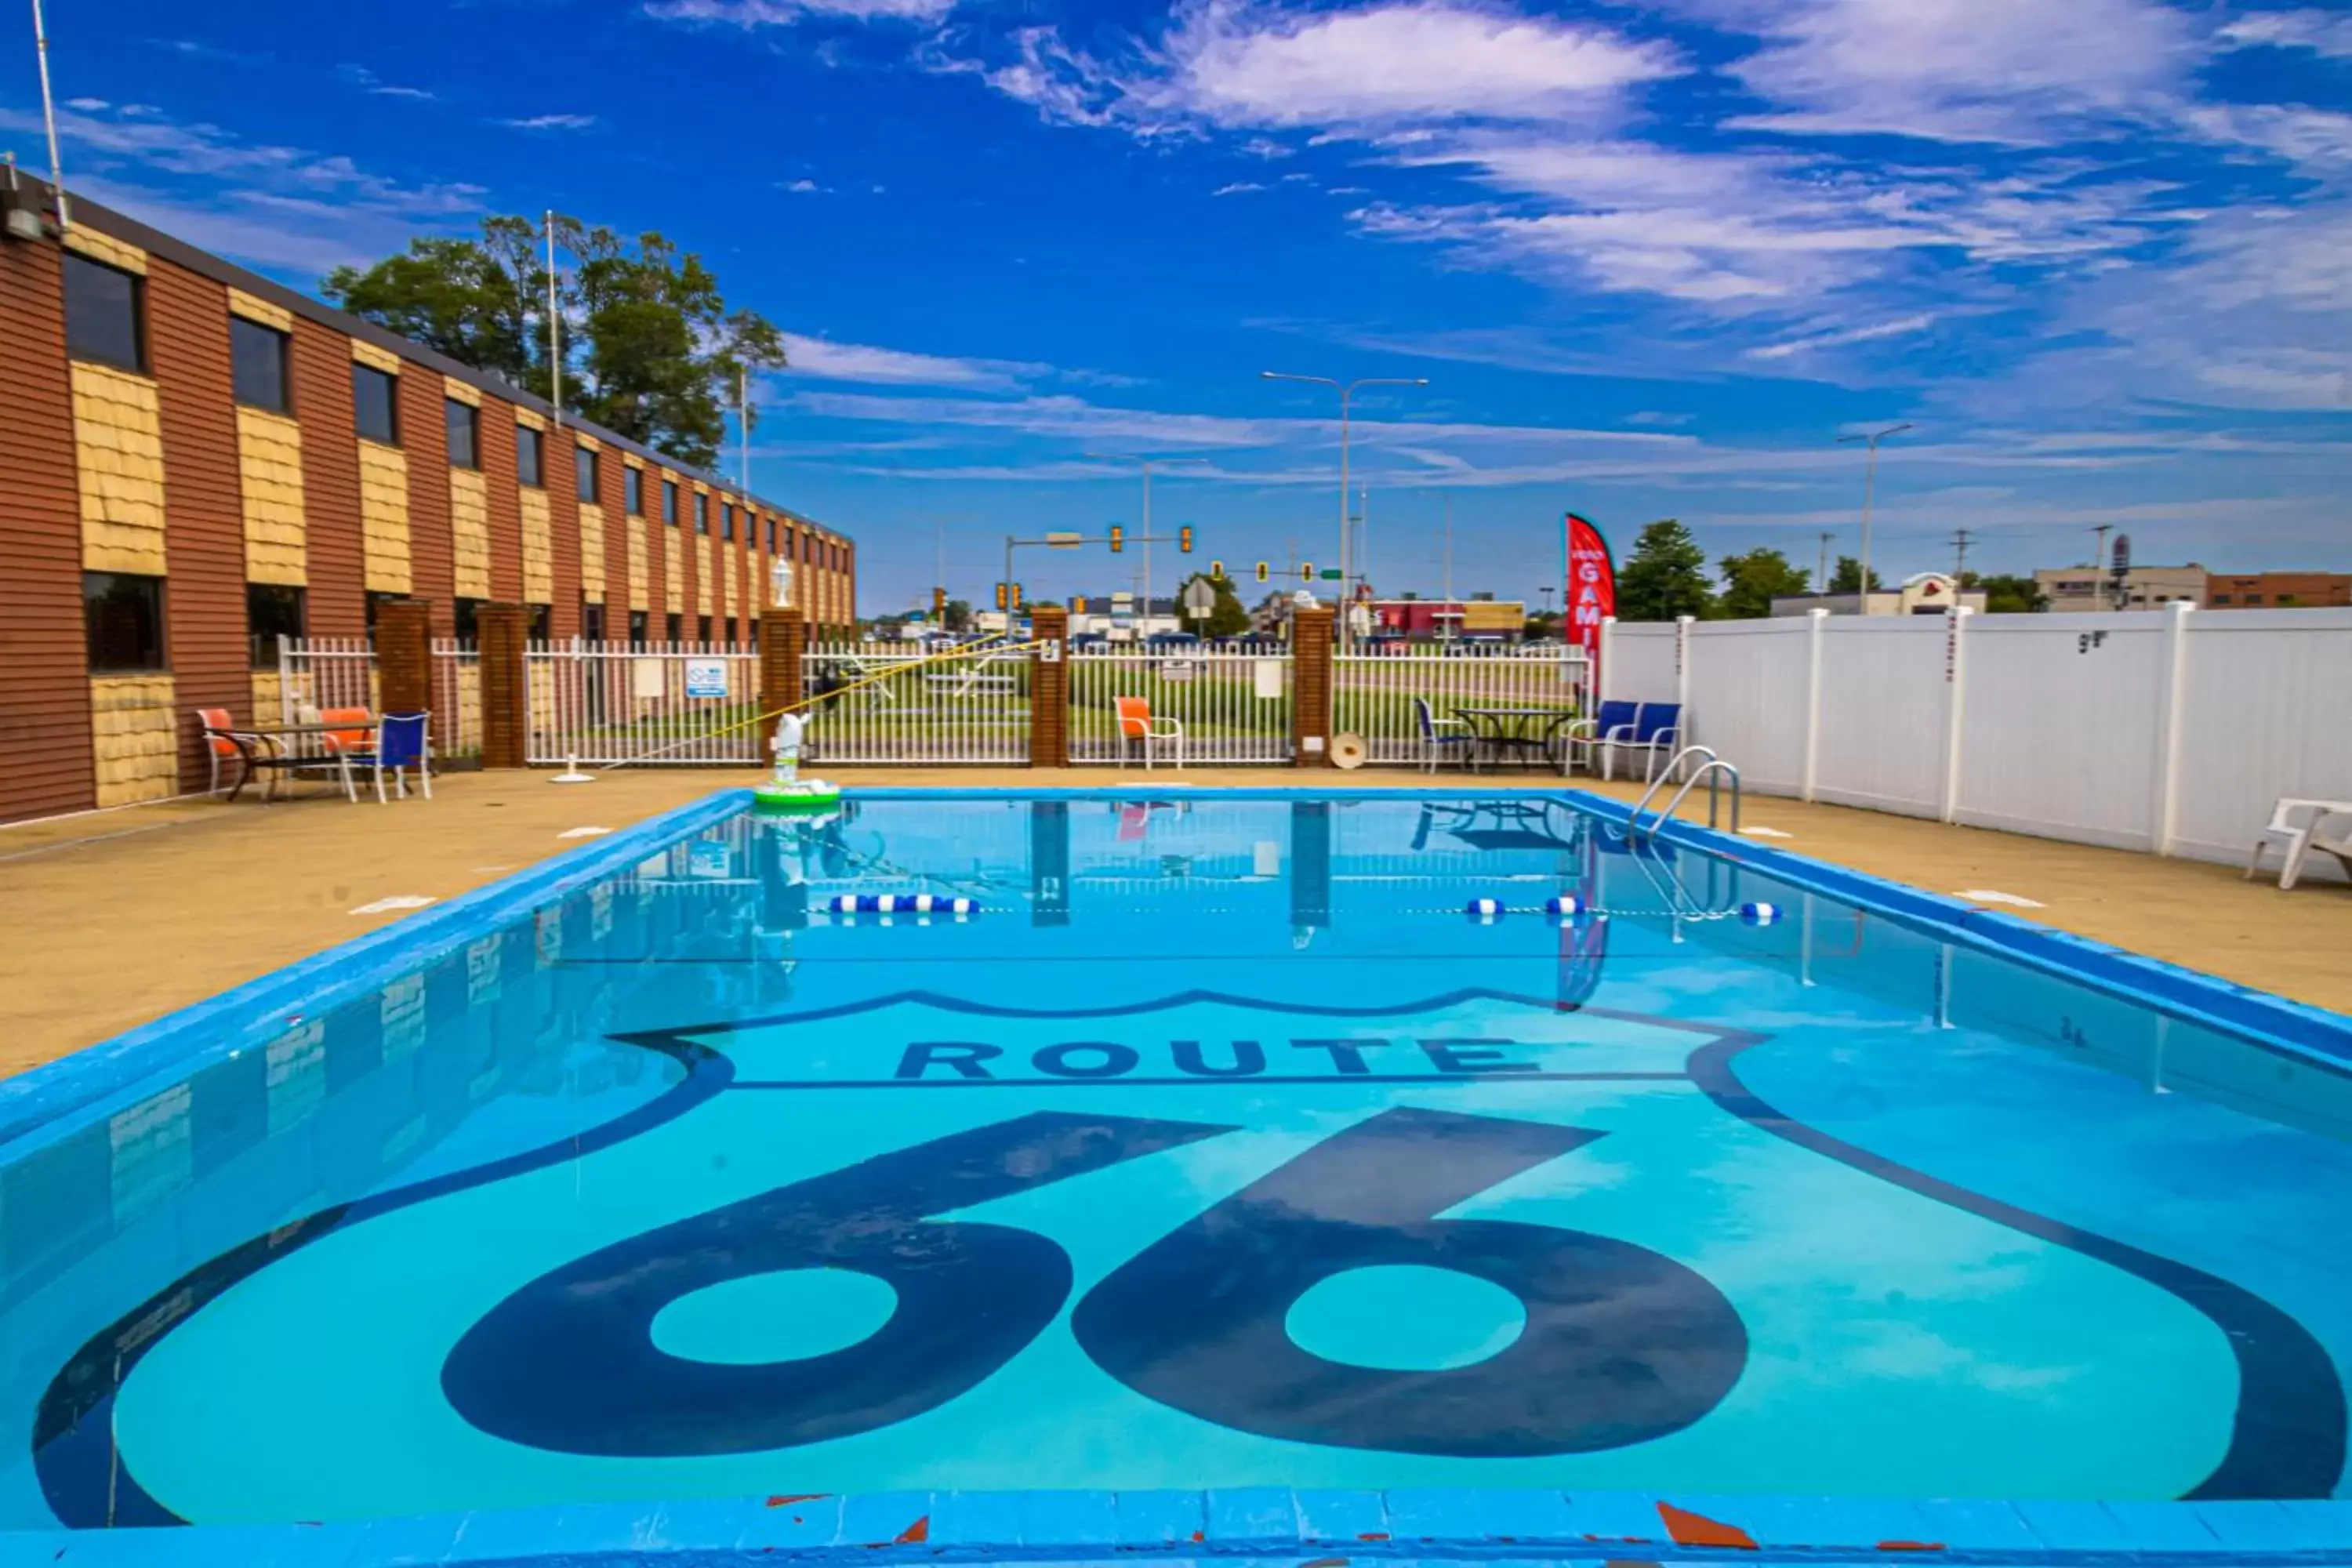 Swimming Pool in Route 66 Hotel, Springfield, Illinois